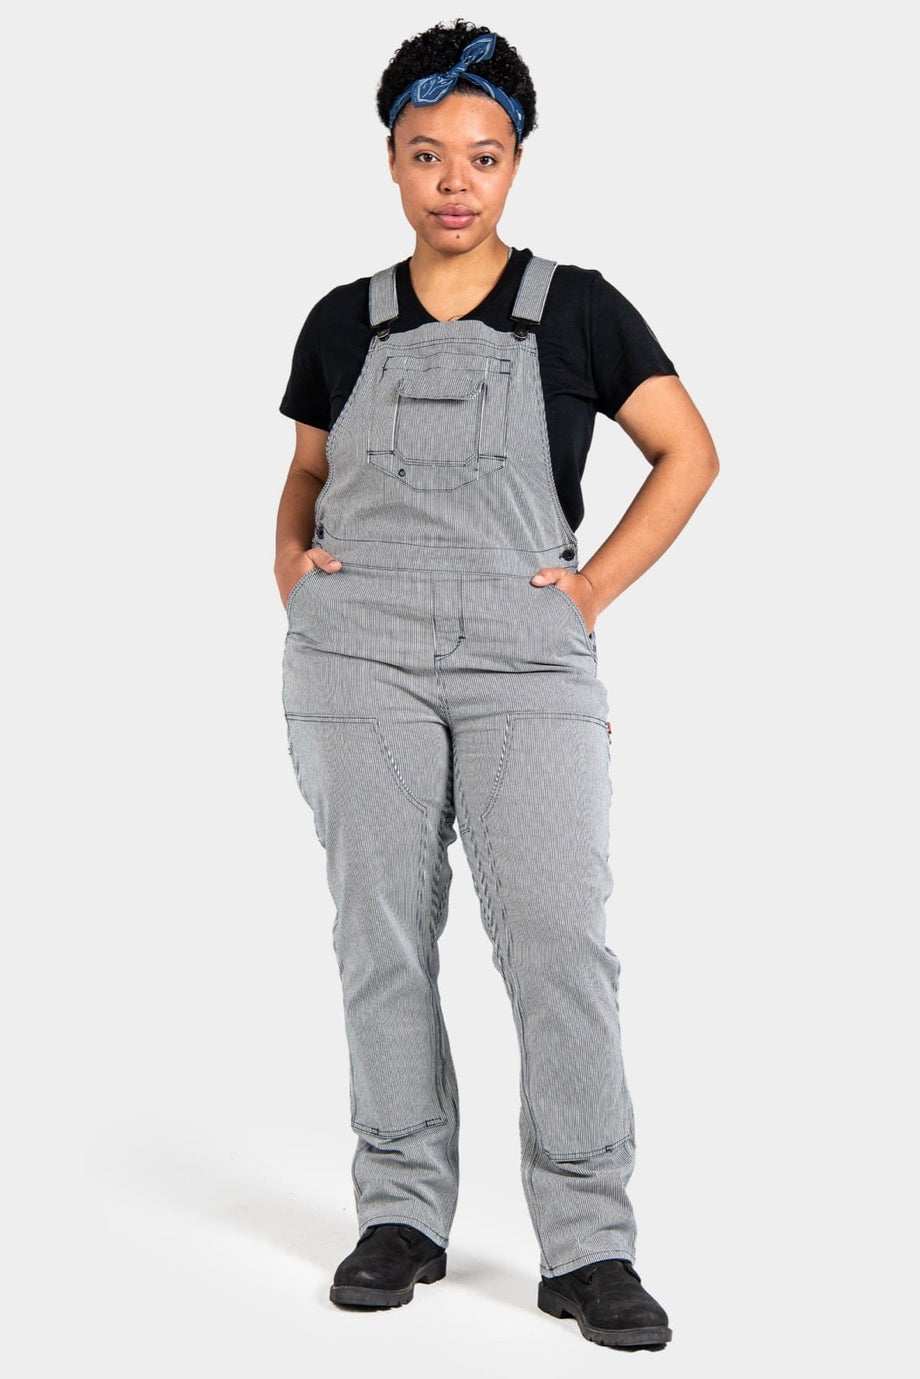 Freshley Overalls For Women in Grey Canvas